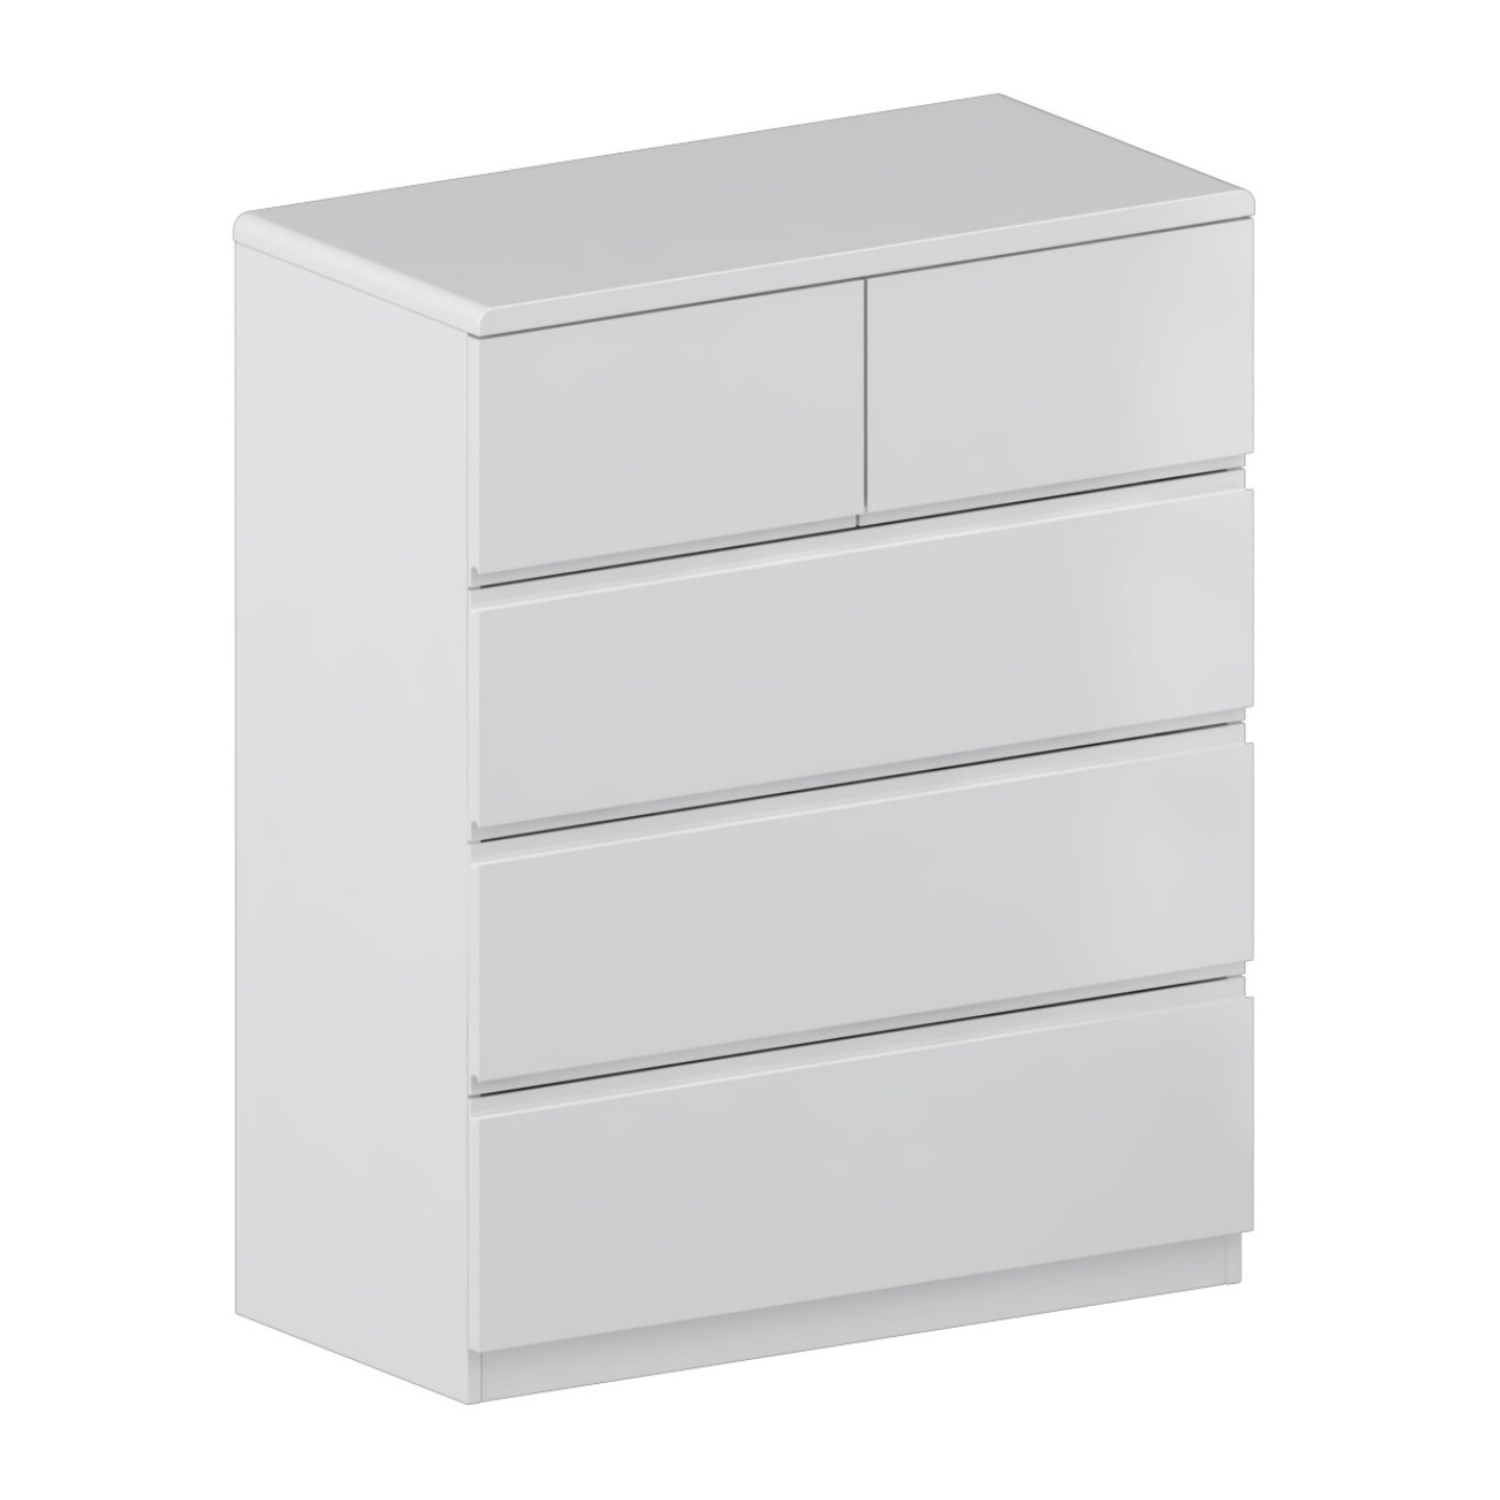 Find suitable chest of drawers in white